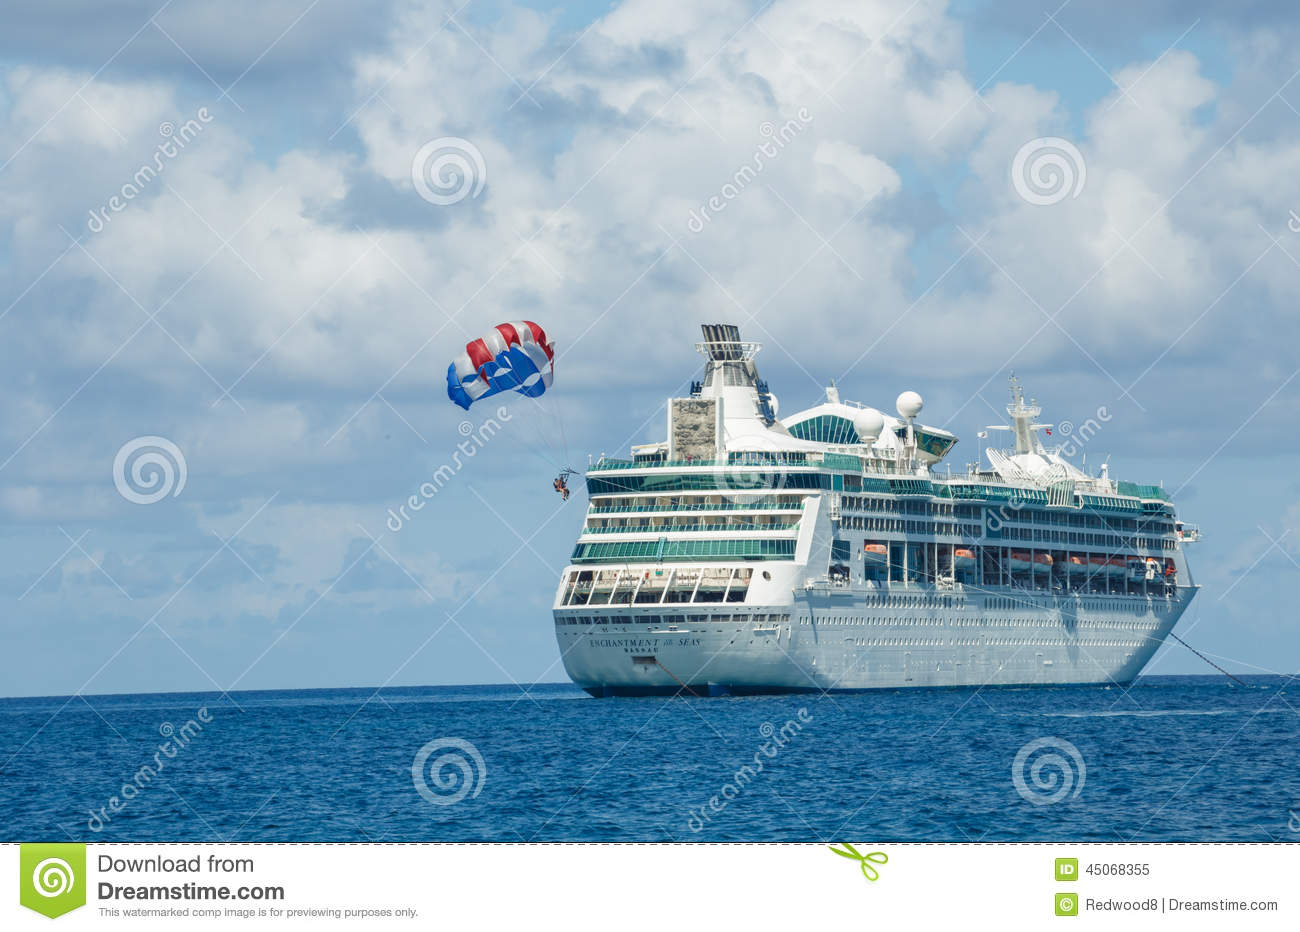 Emerald Of The Seas Cruise Ship From Royal Caribbean Cruise Line    